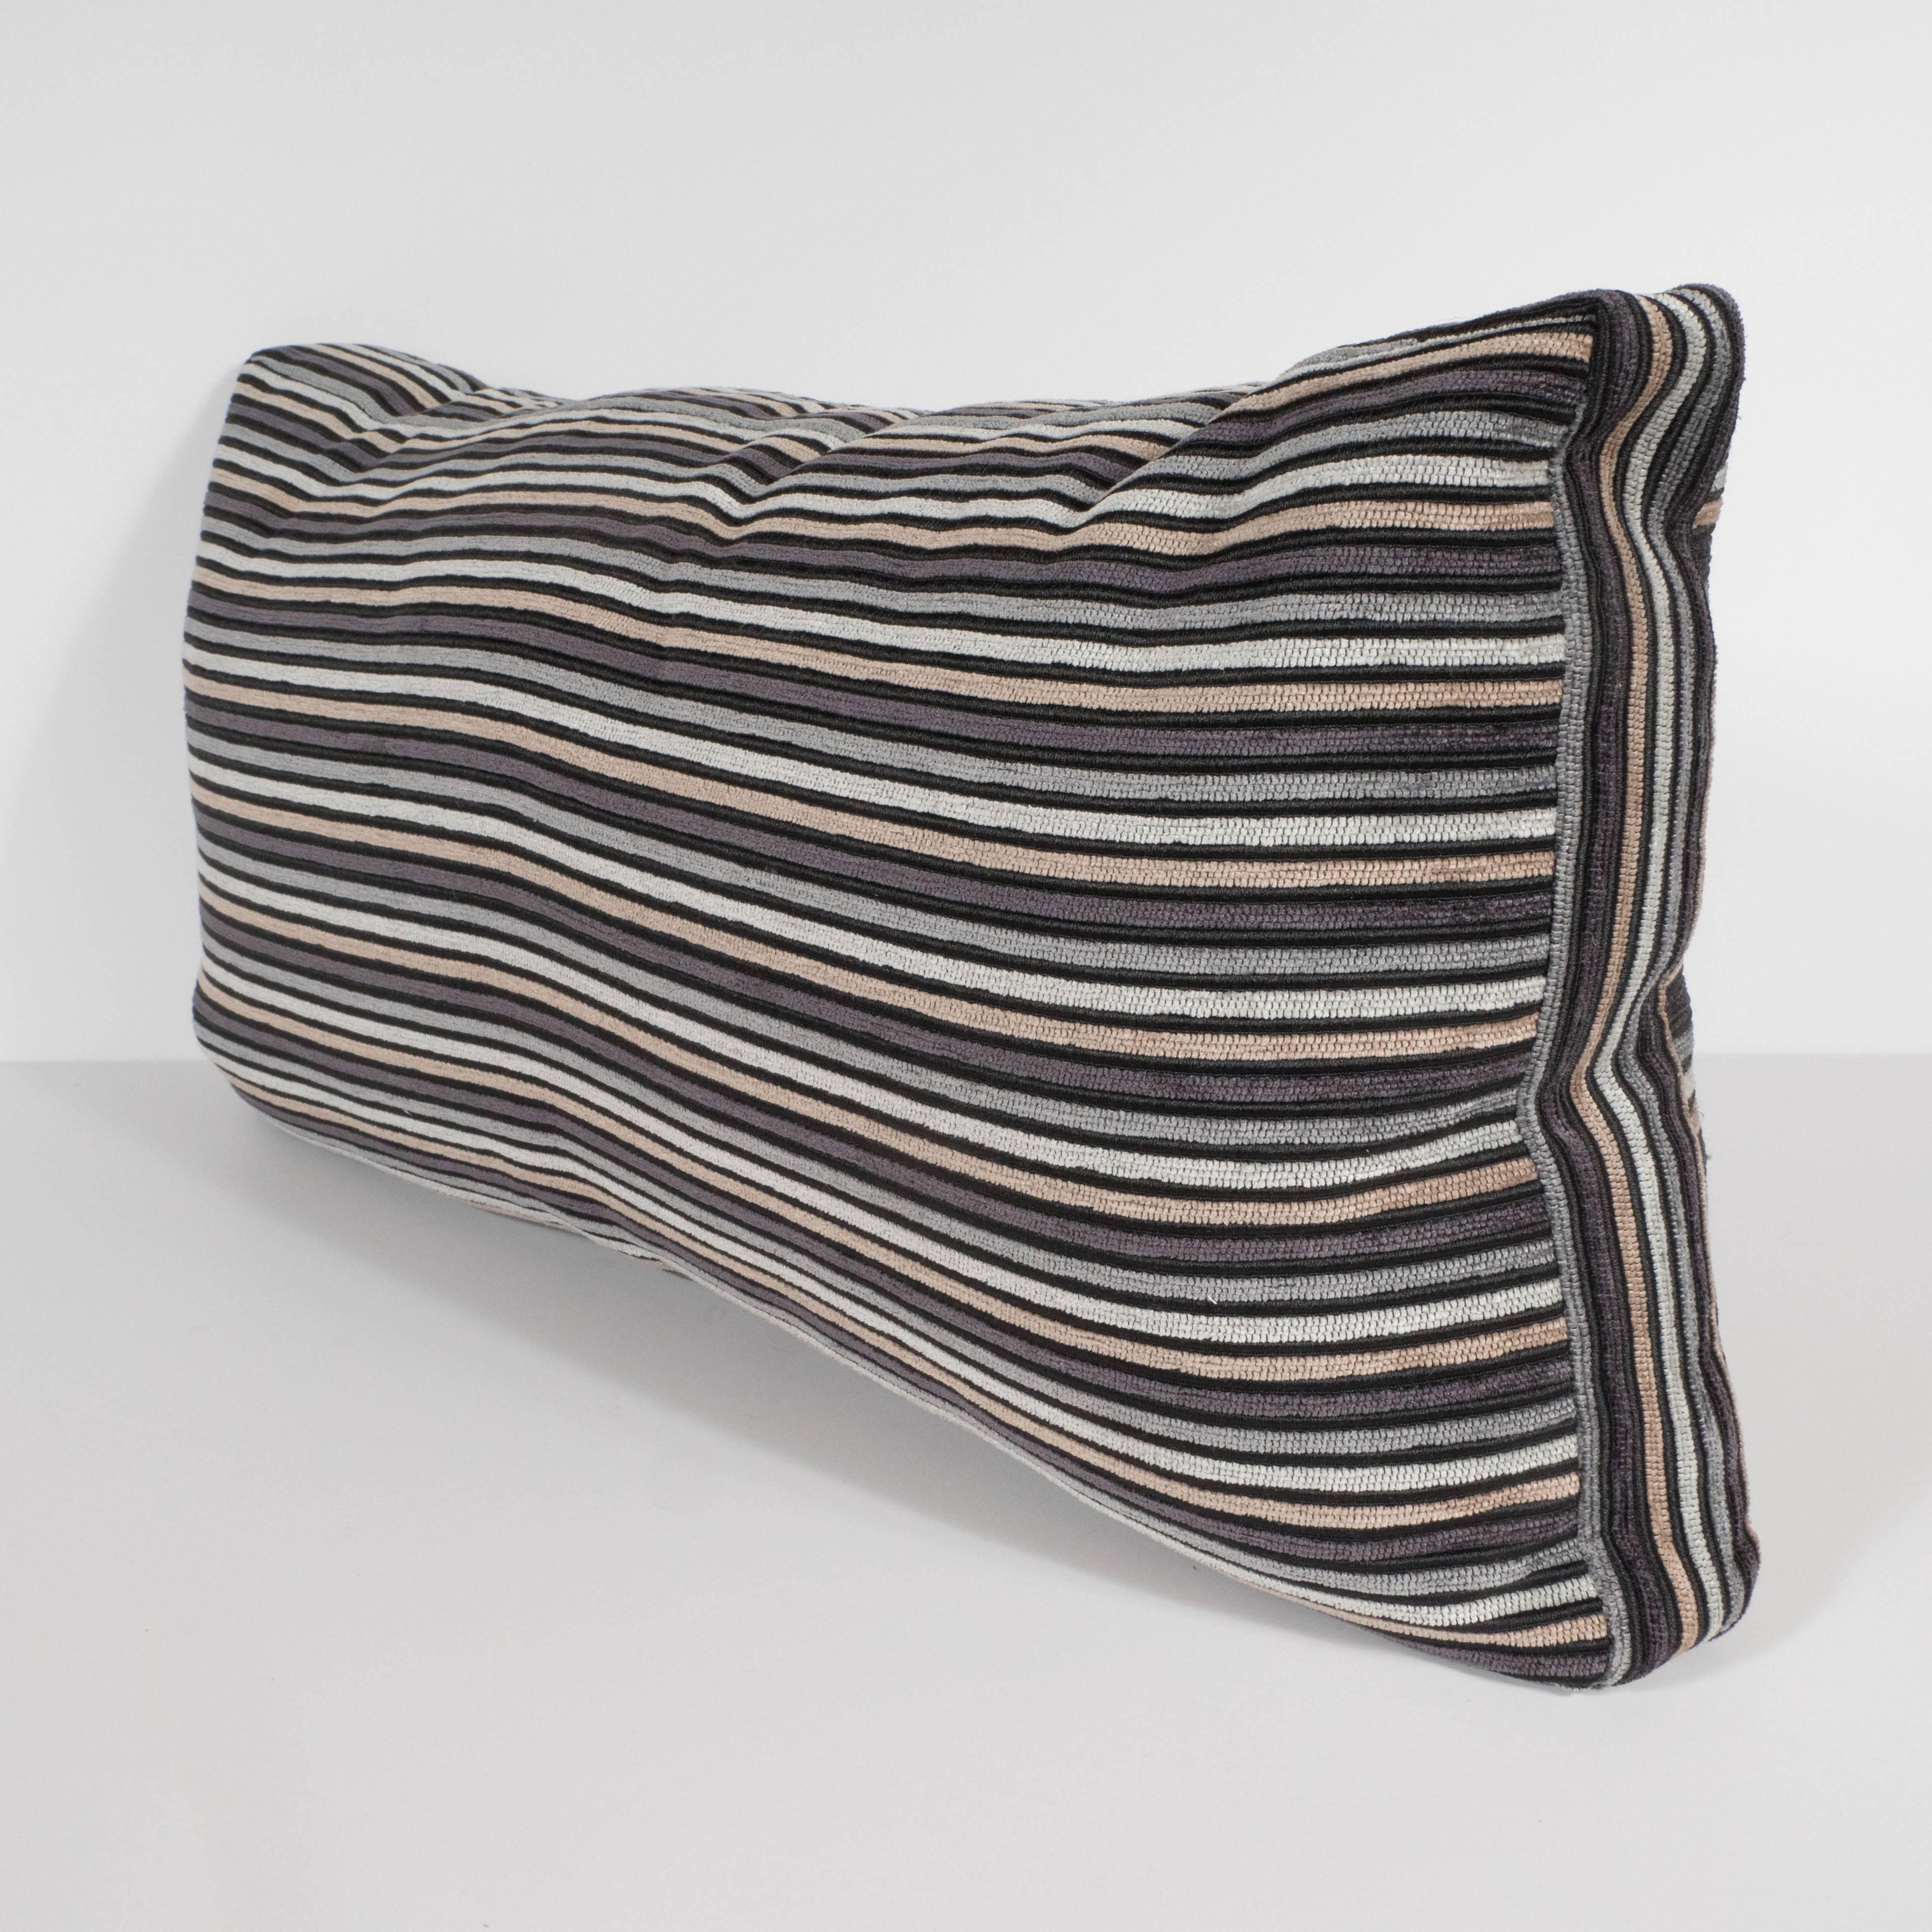 This sophisticated pair of striped rectangular pillows features hues of champagne, oyster, smoked platinum, and charcoal hues with alternating black lines. The neutral tones of these pillows would be a perfect complement to virtually any color